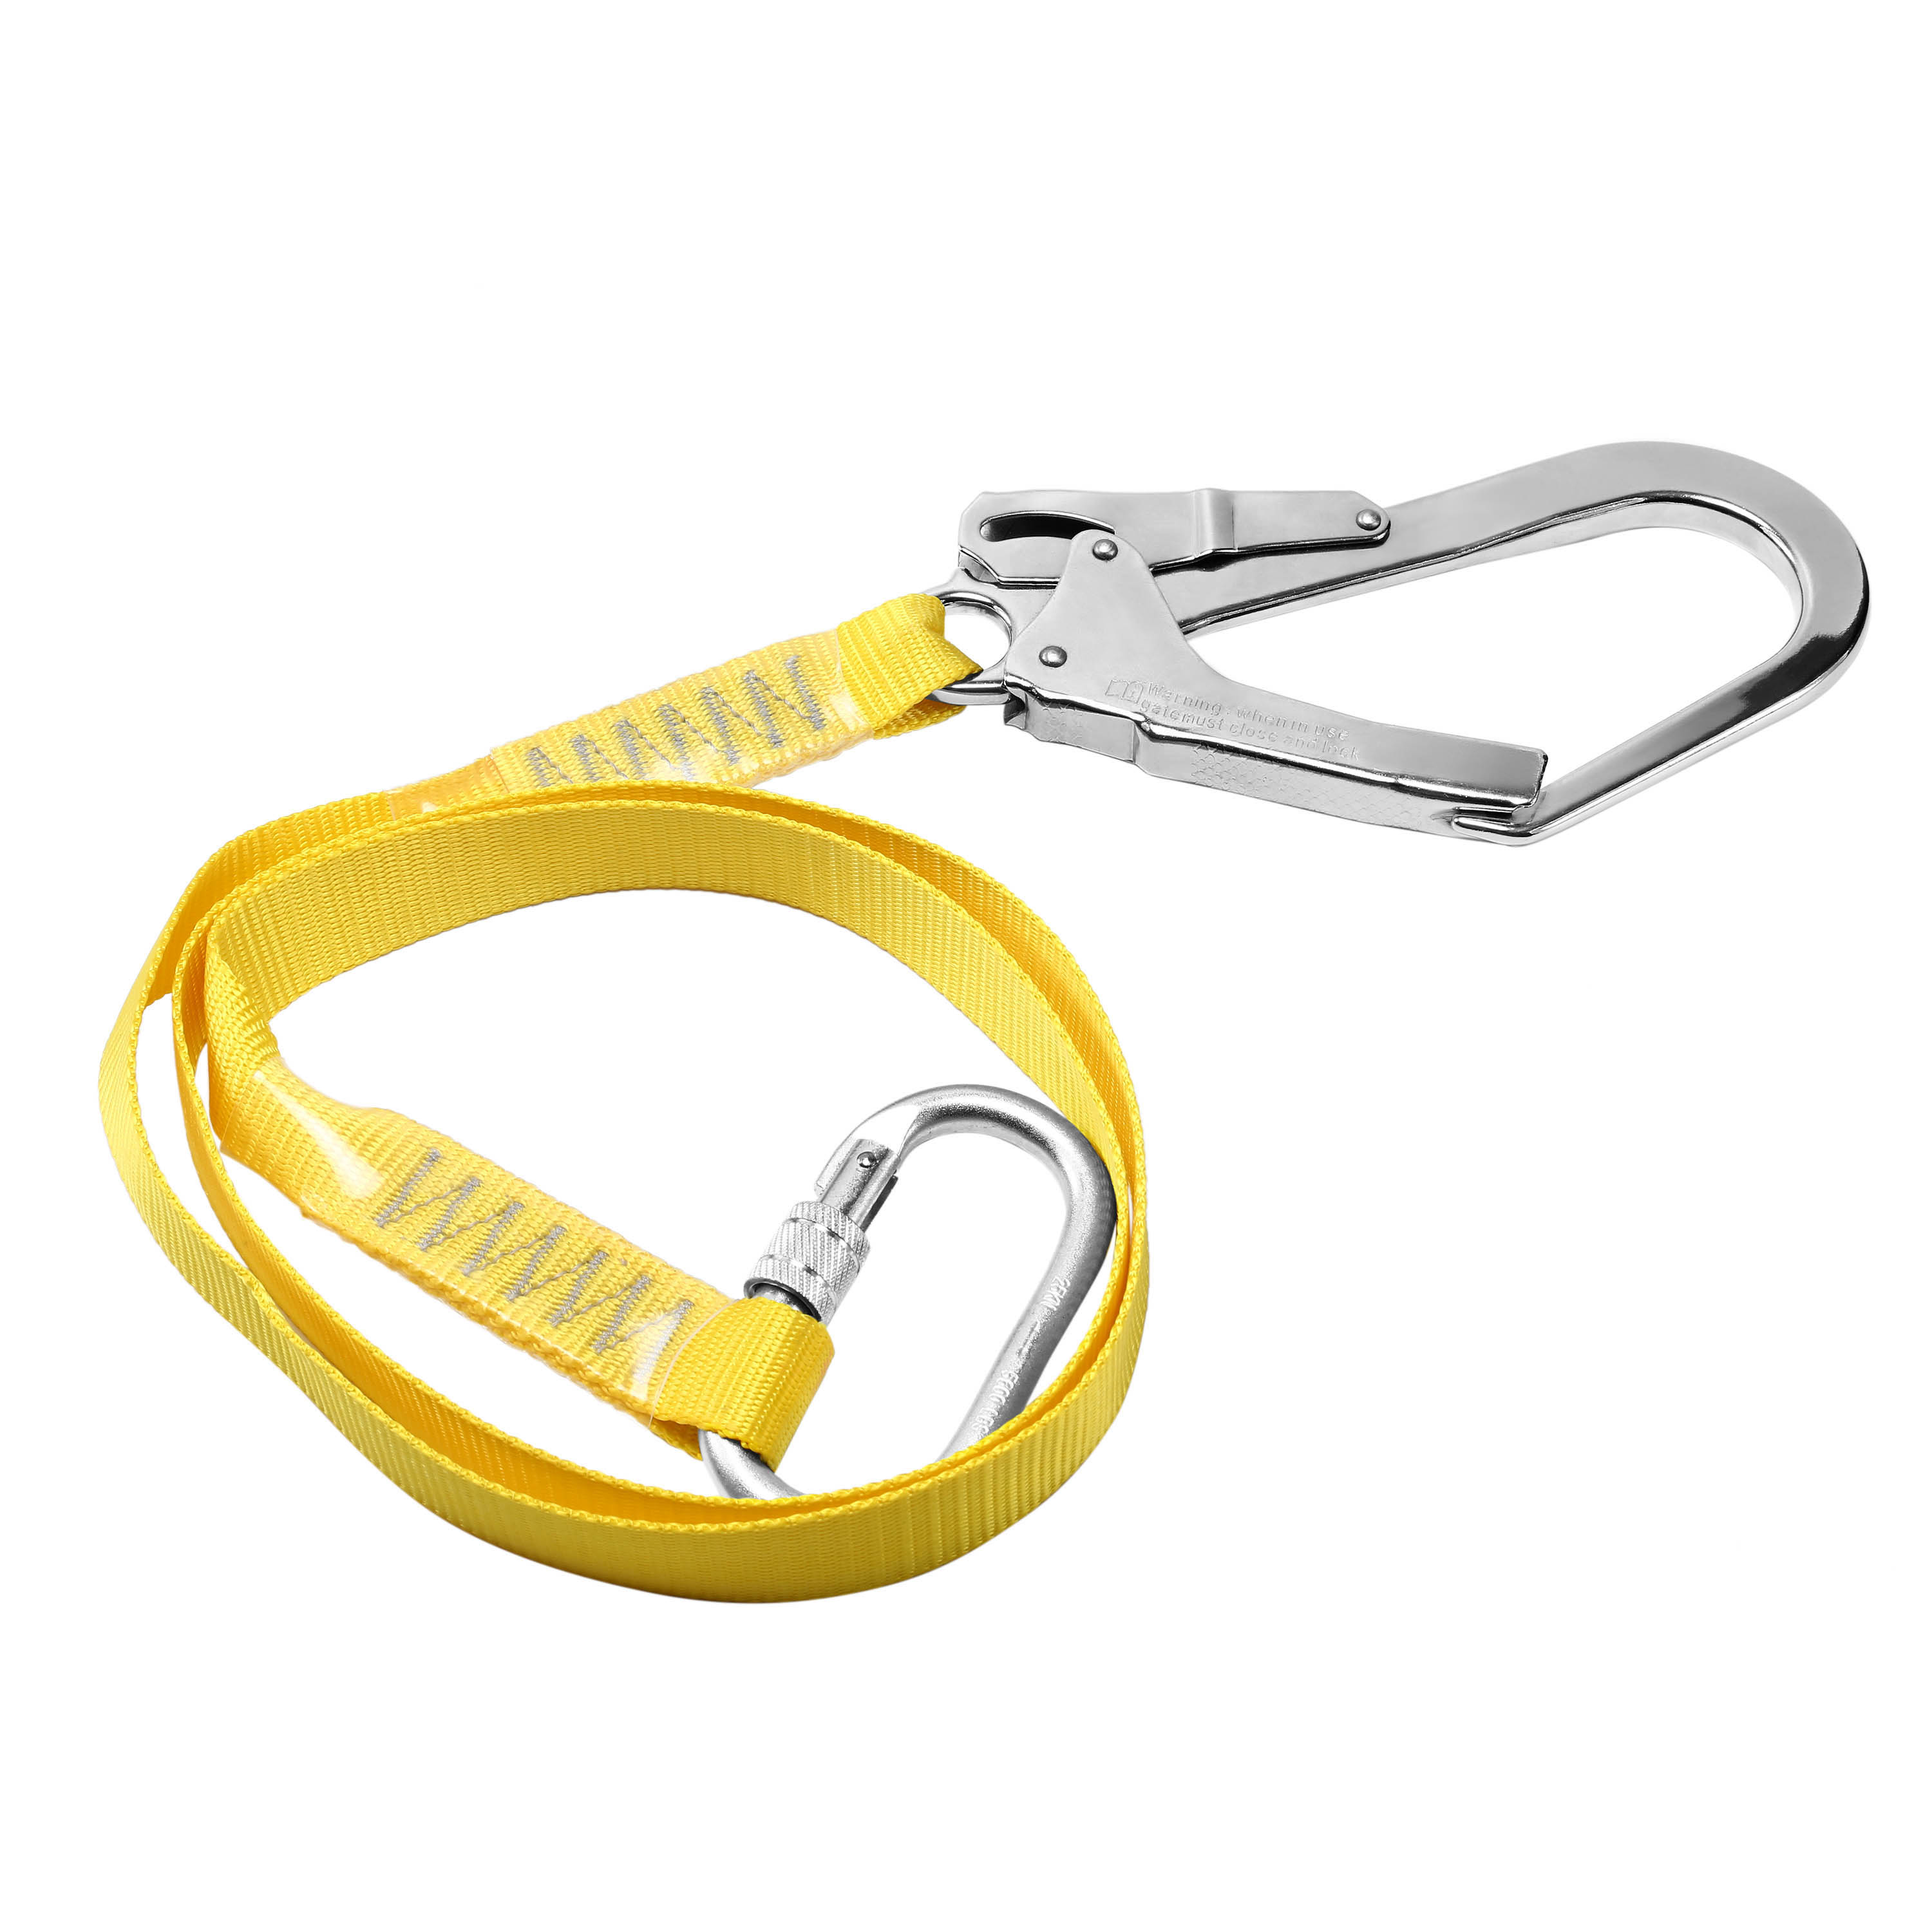 Outdoor Rock Climbing Fall Protection Safety Harness Lanyard w/ Carabiner 